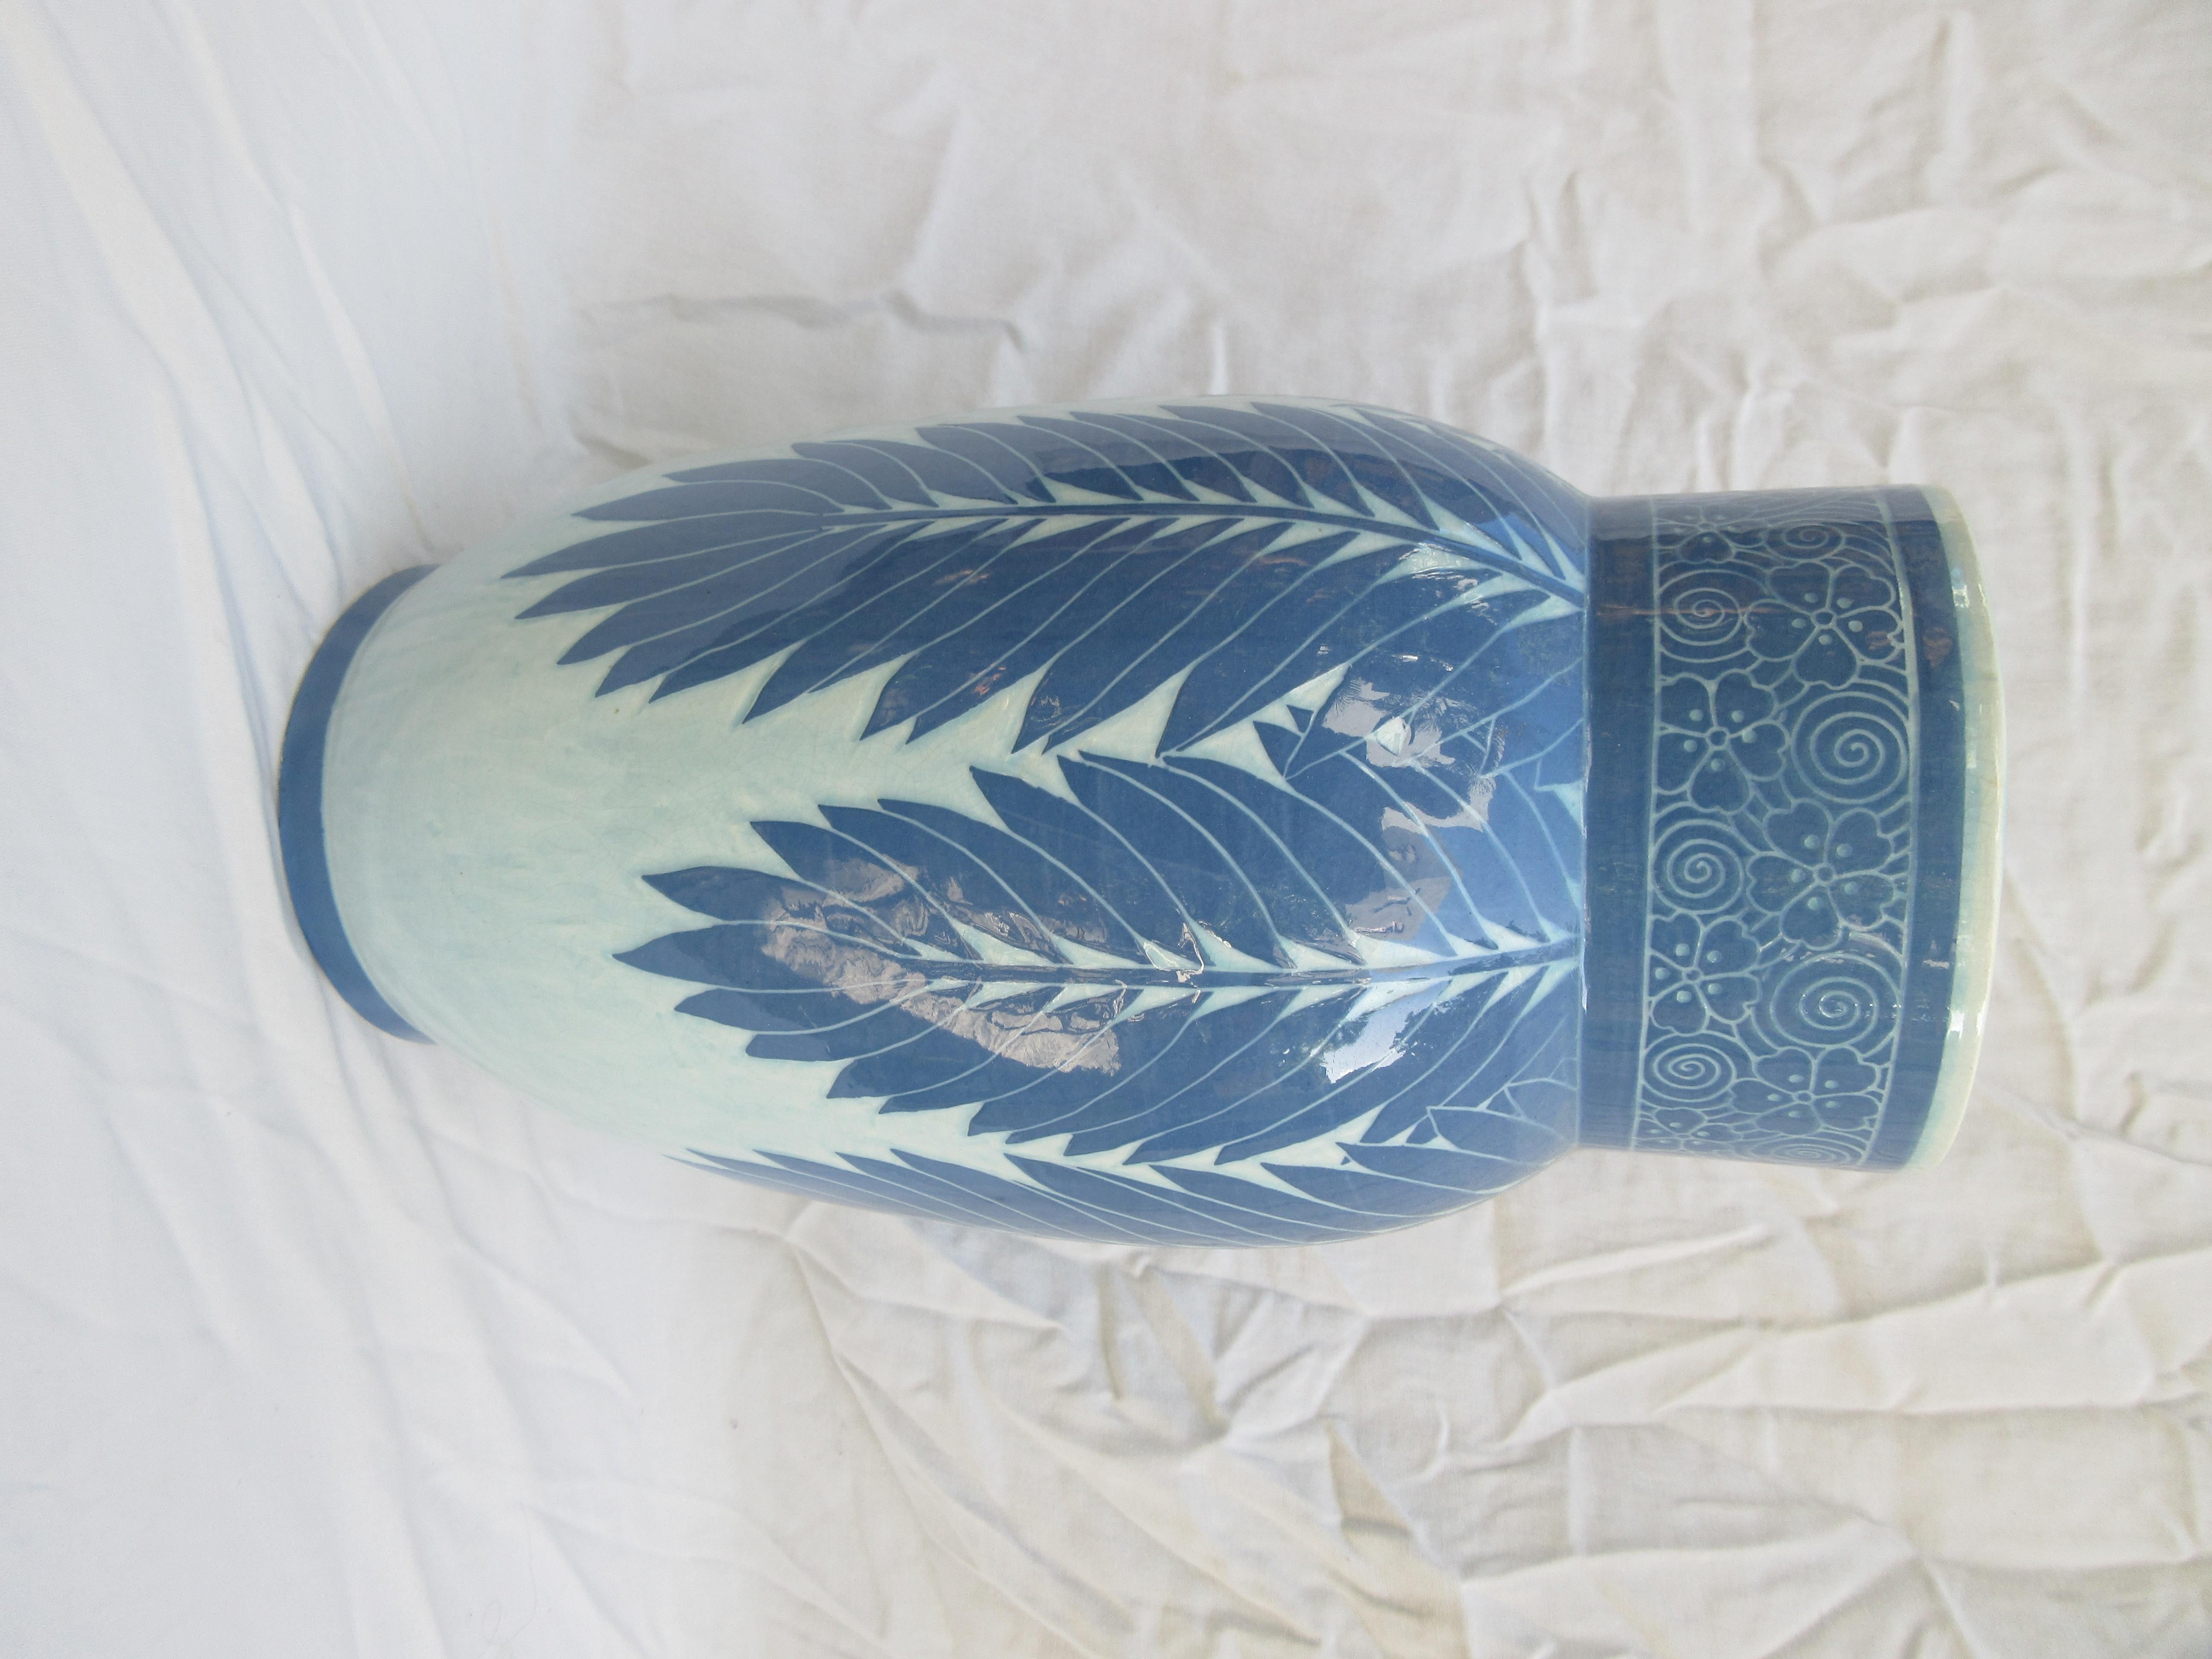 This is a handmade vase, and a very rare white and blue one. The only one of its kind. Signed and dated, J-Ekberg 1908. A Swedish artist that started working for the Gustavsberg ceramic foundry in Stockholm Sweden in 1898 and worked there till his